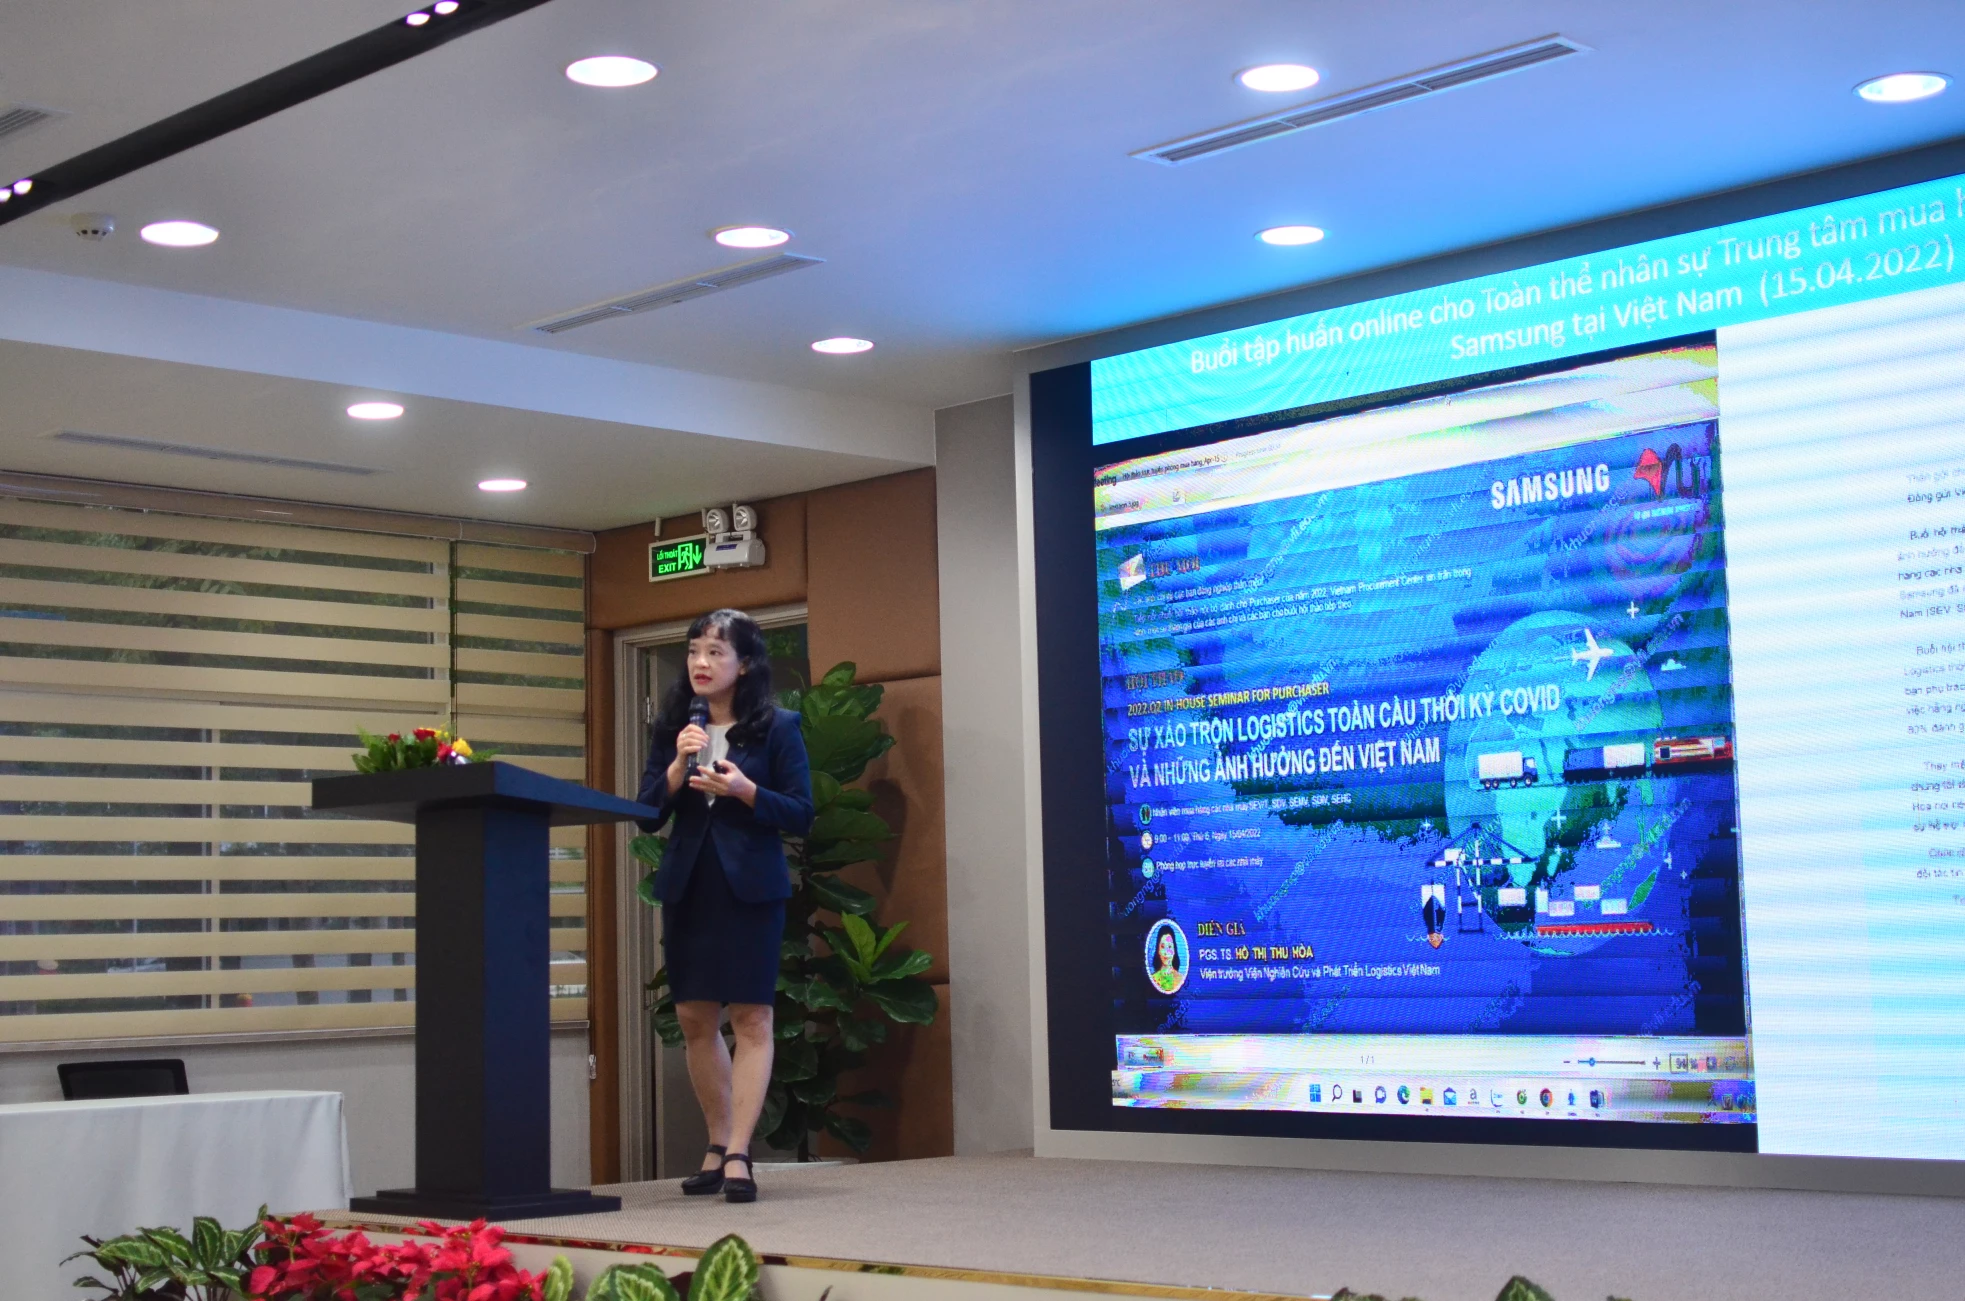 InterLOG and VISA jointly organize the seminar "Global turmoil and its effects on Vietnam's supply chain"